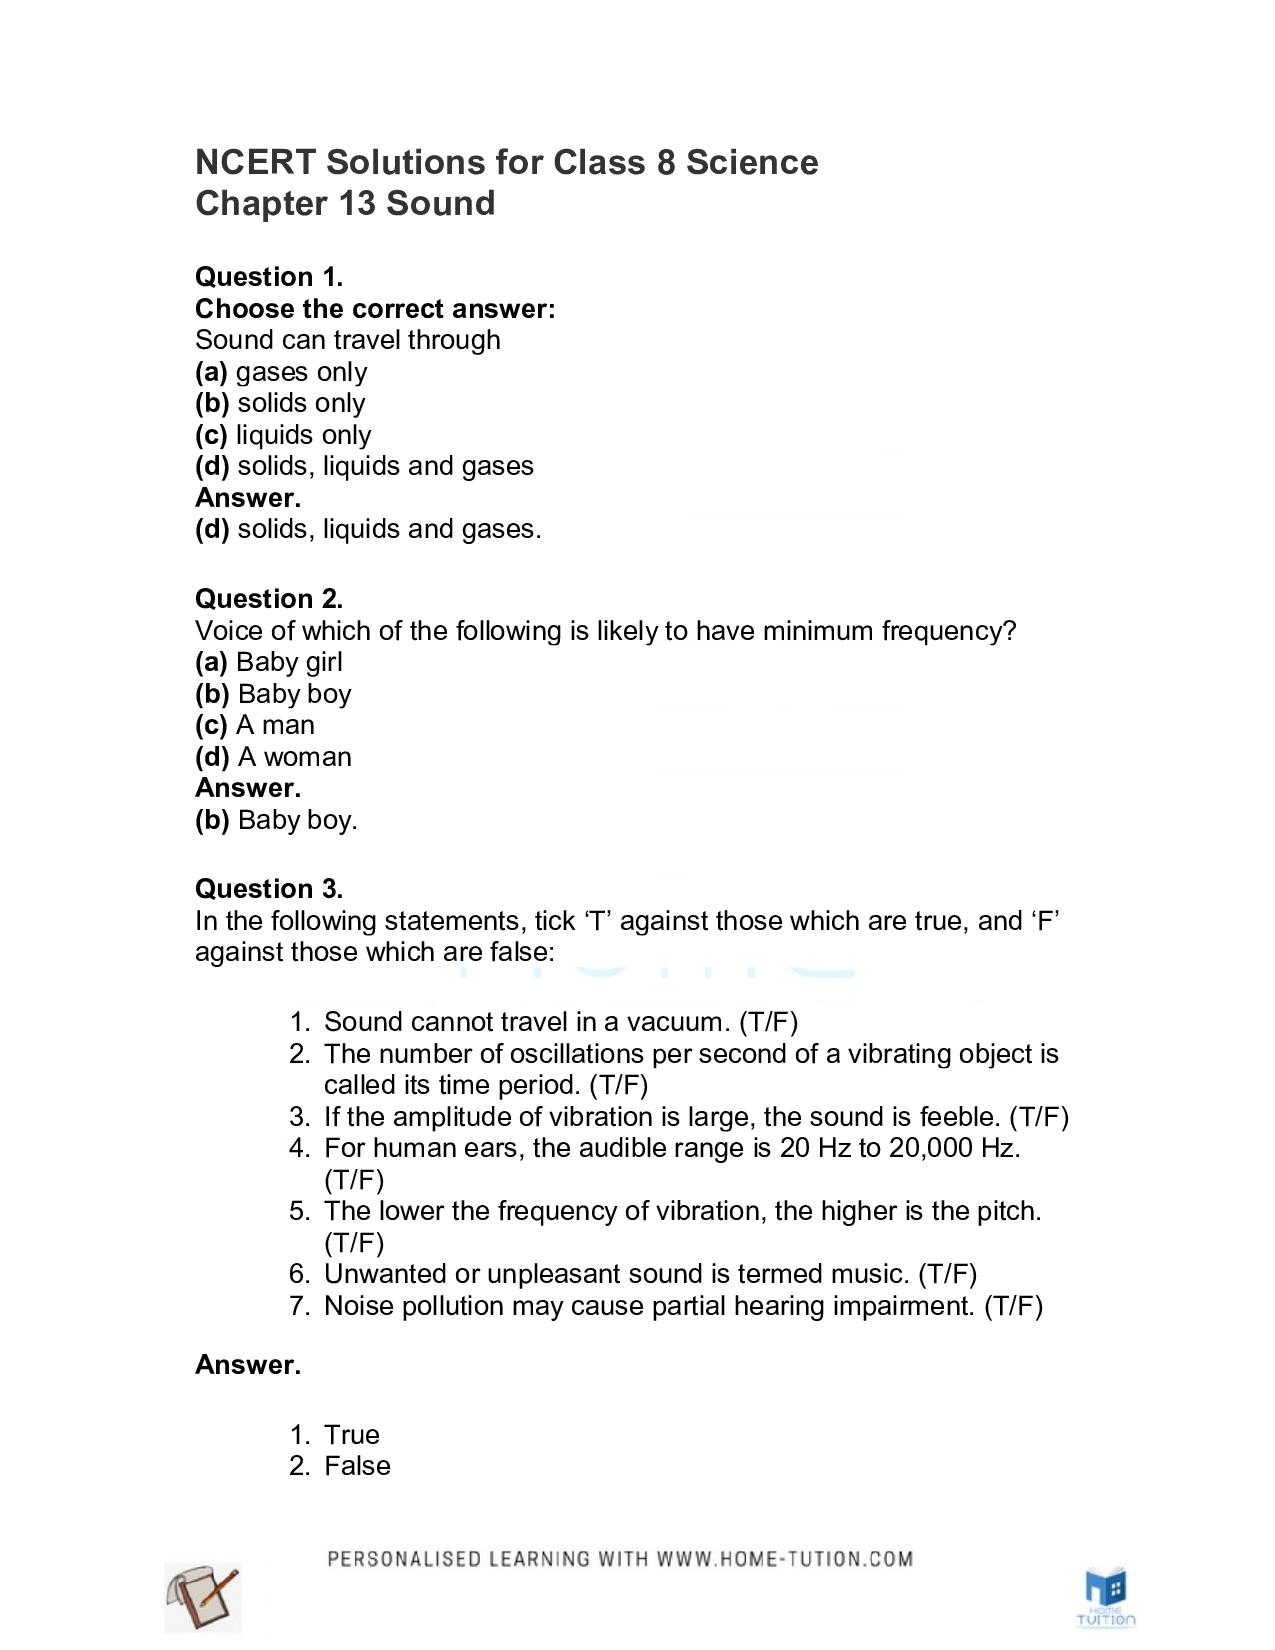 Class 8 Science Chapter 13 Sound